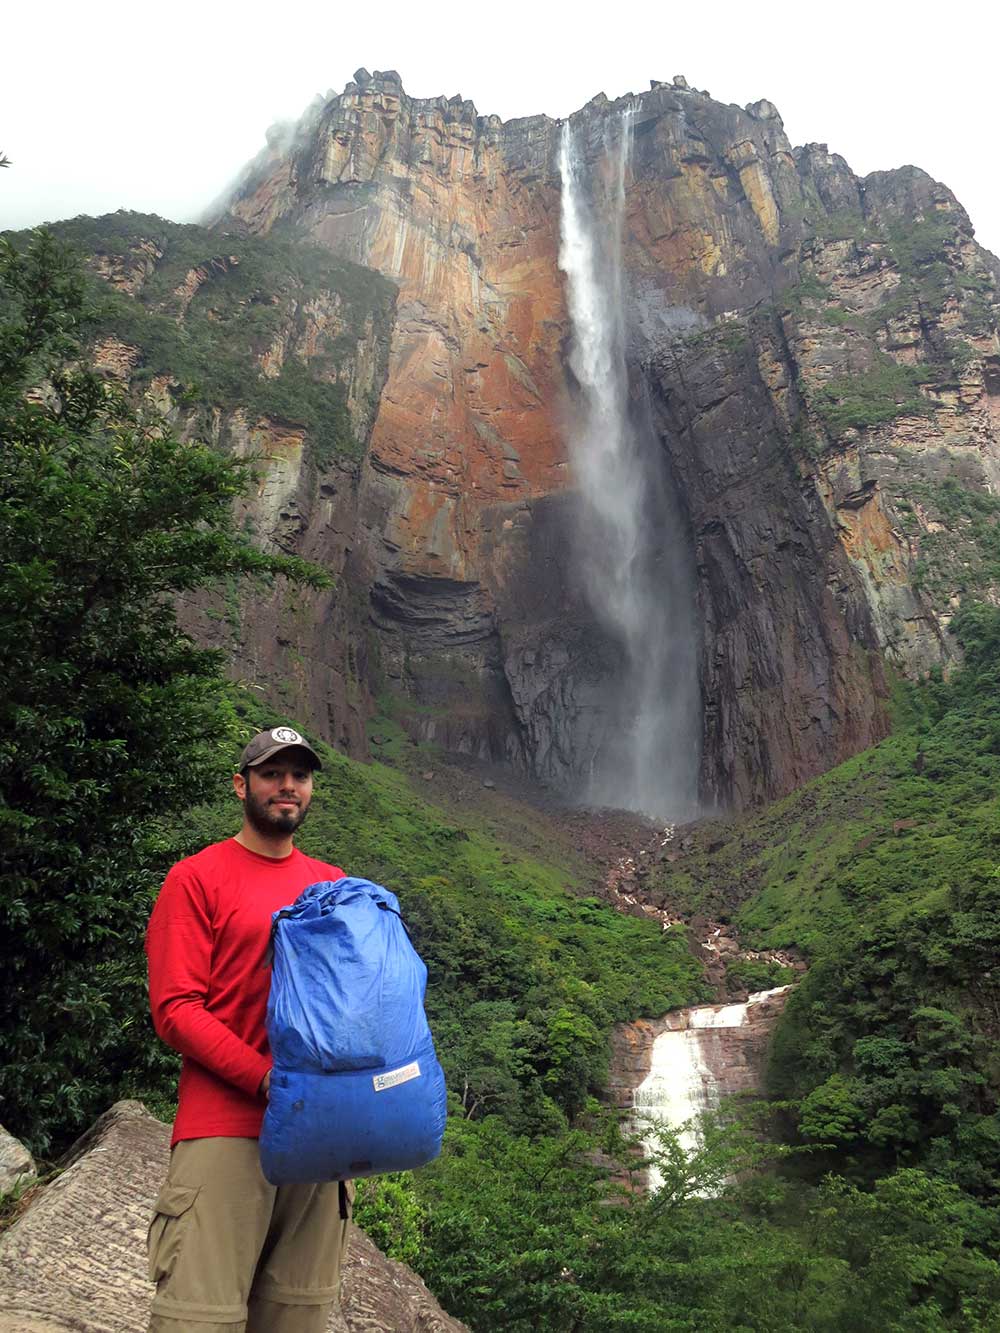 The author with his Gossamer Gear